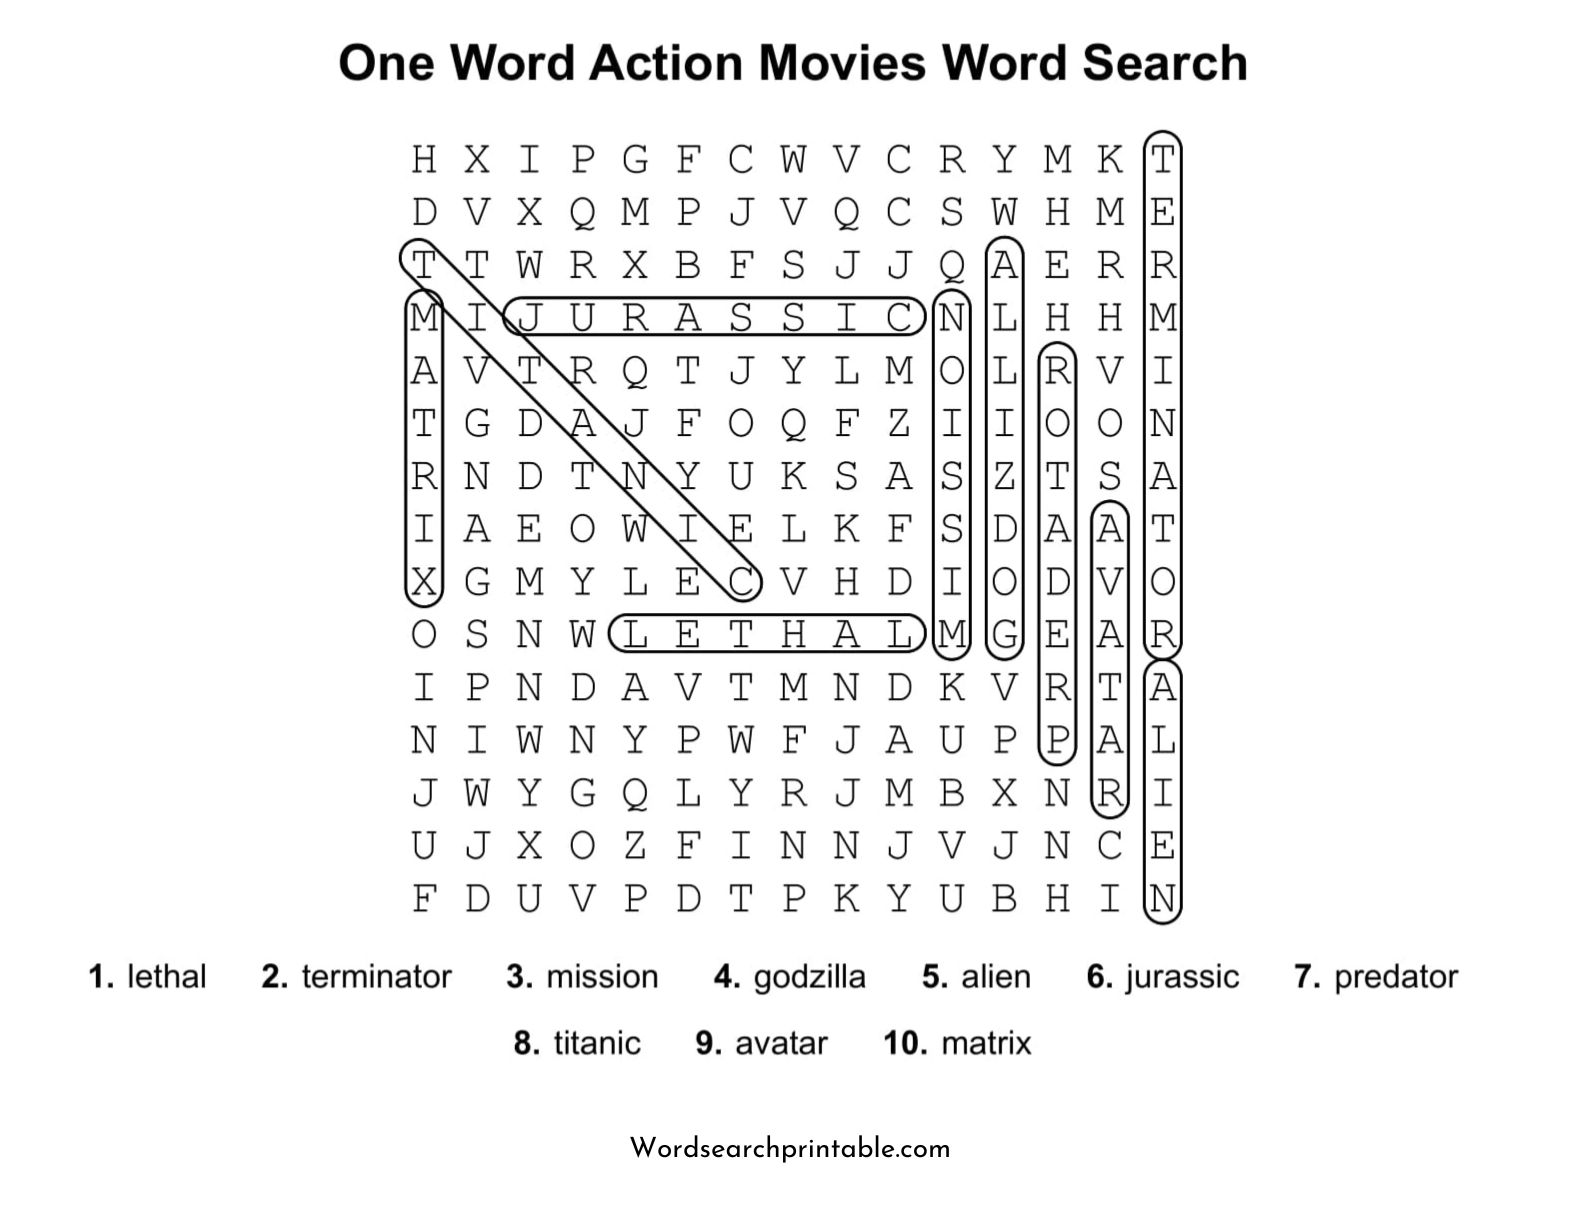 one word action movies word search puzzle solution